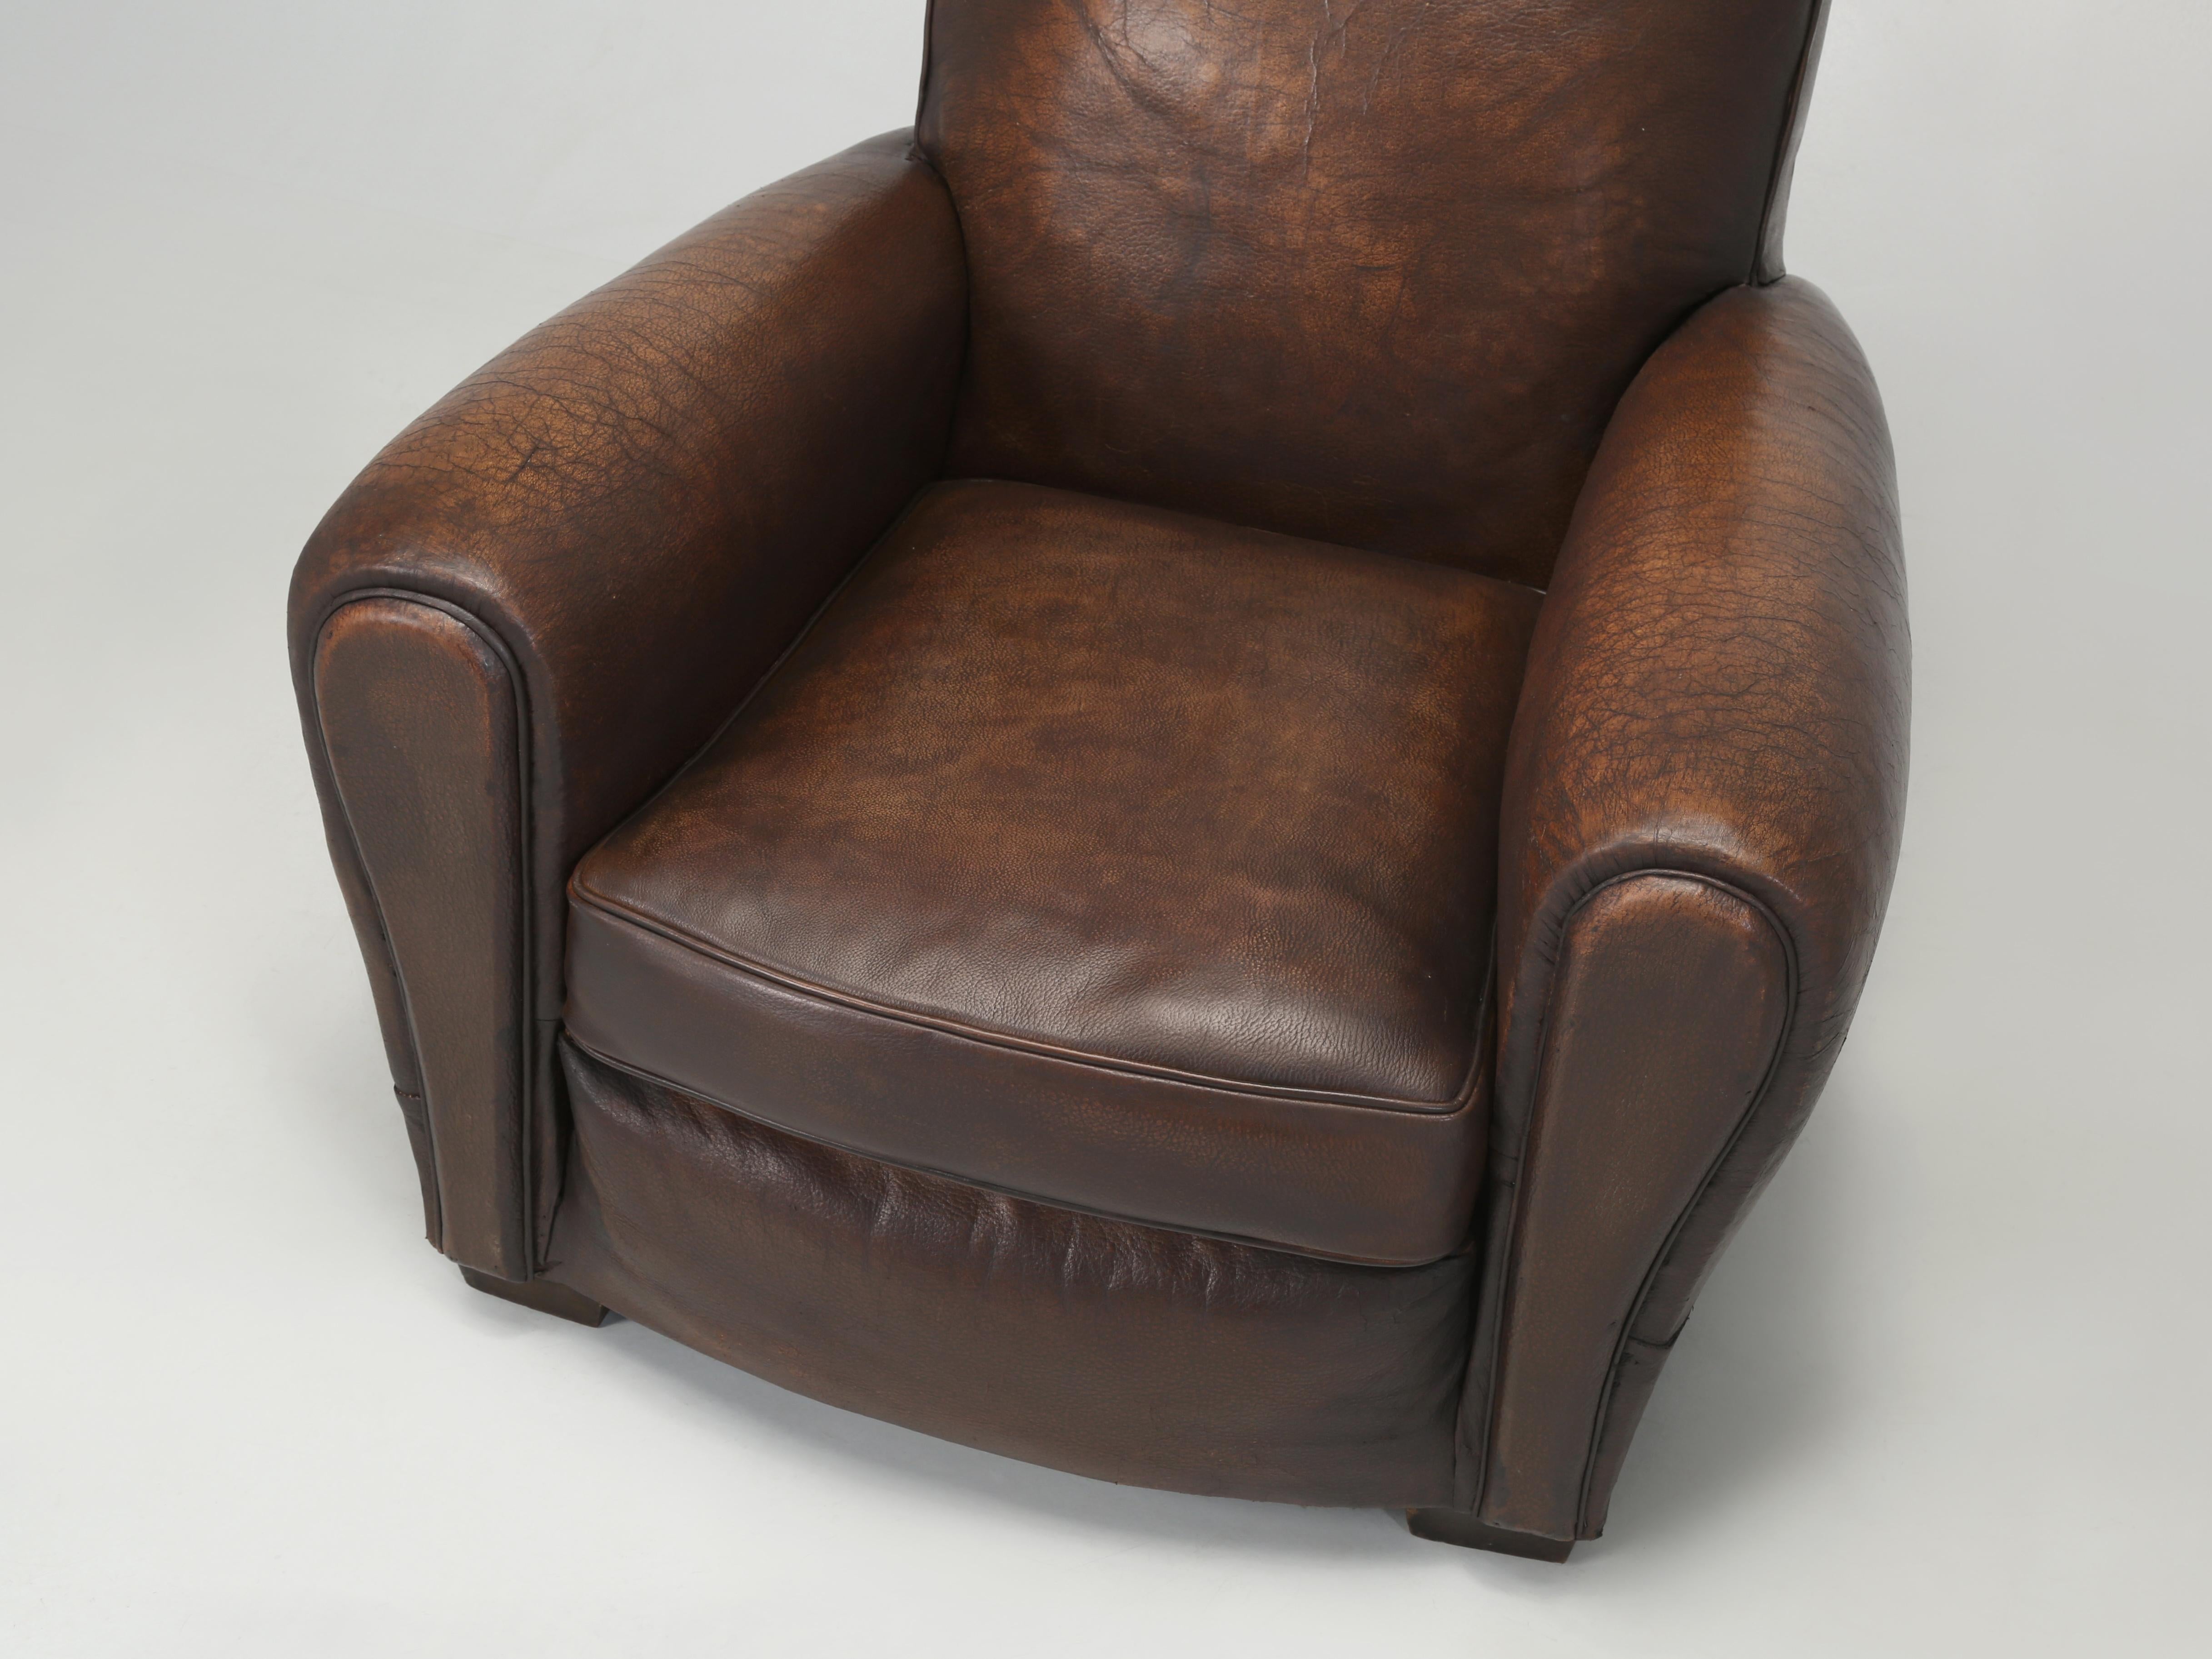 European Vintage Leather Club Chair Internally Restored Cosmetically Left Original c1930s For Sale